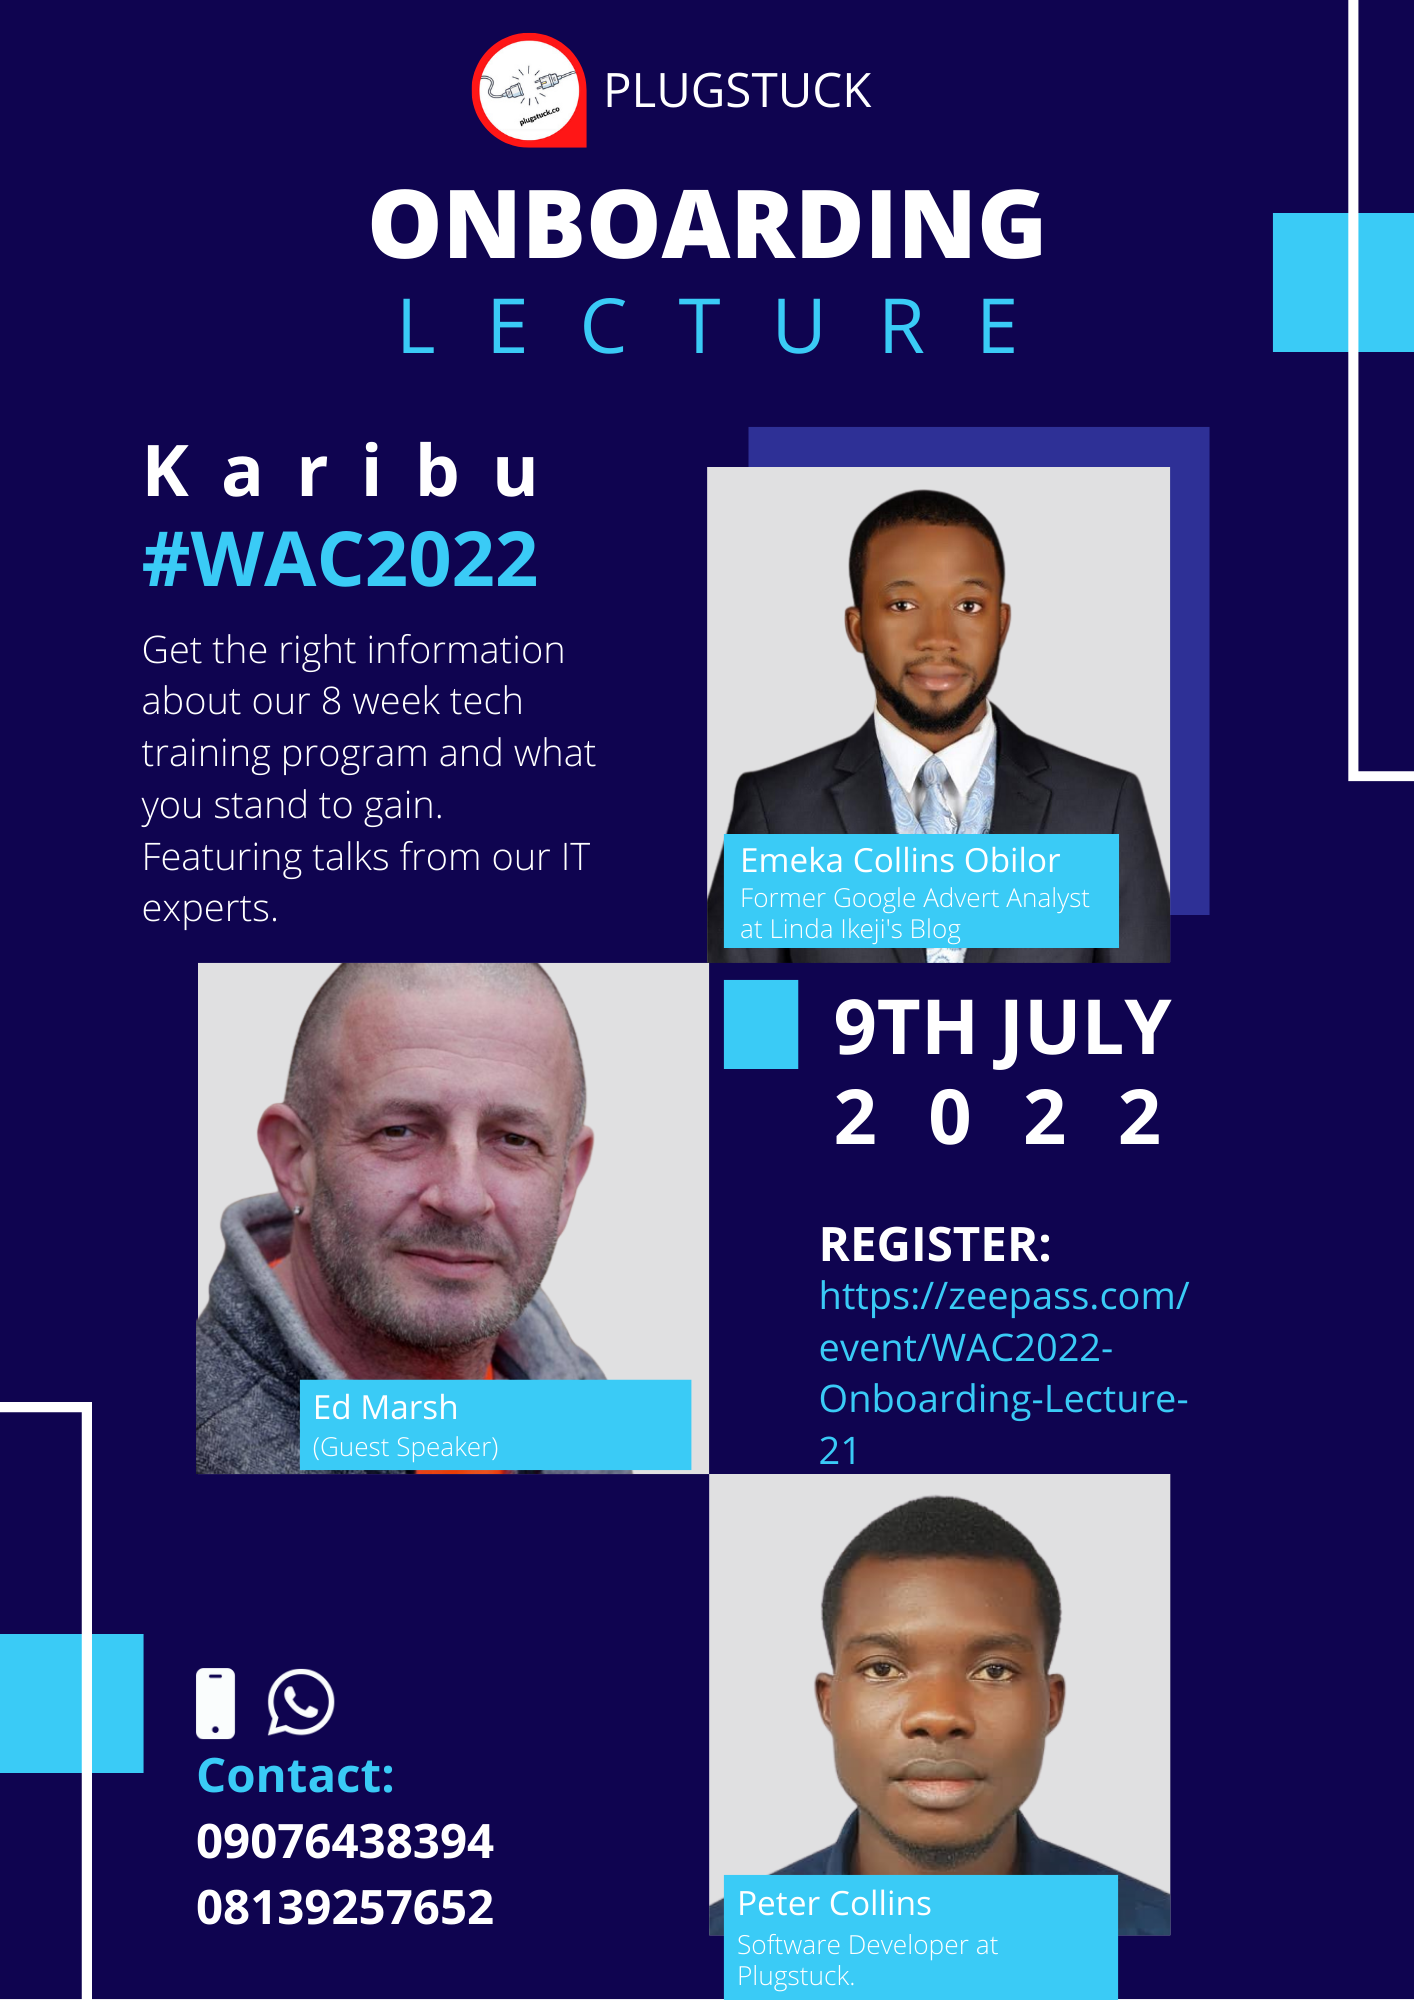 Onboarding for #WAC2022